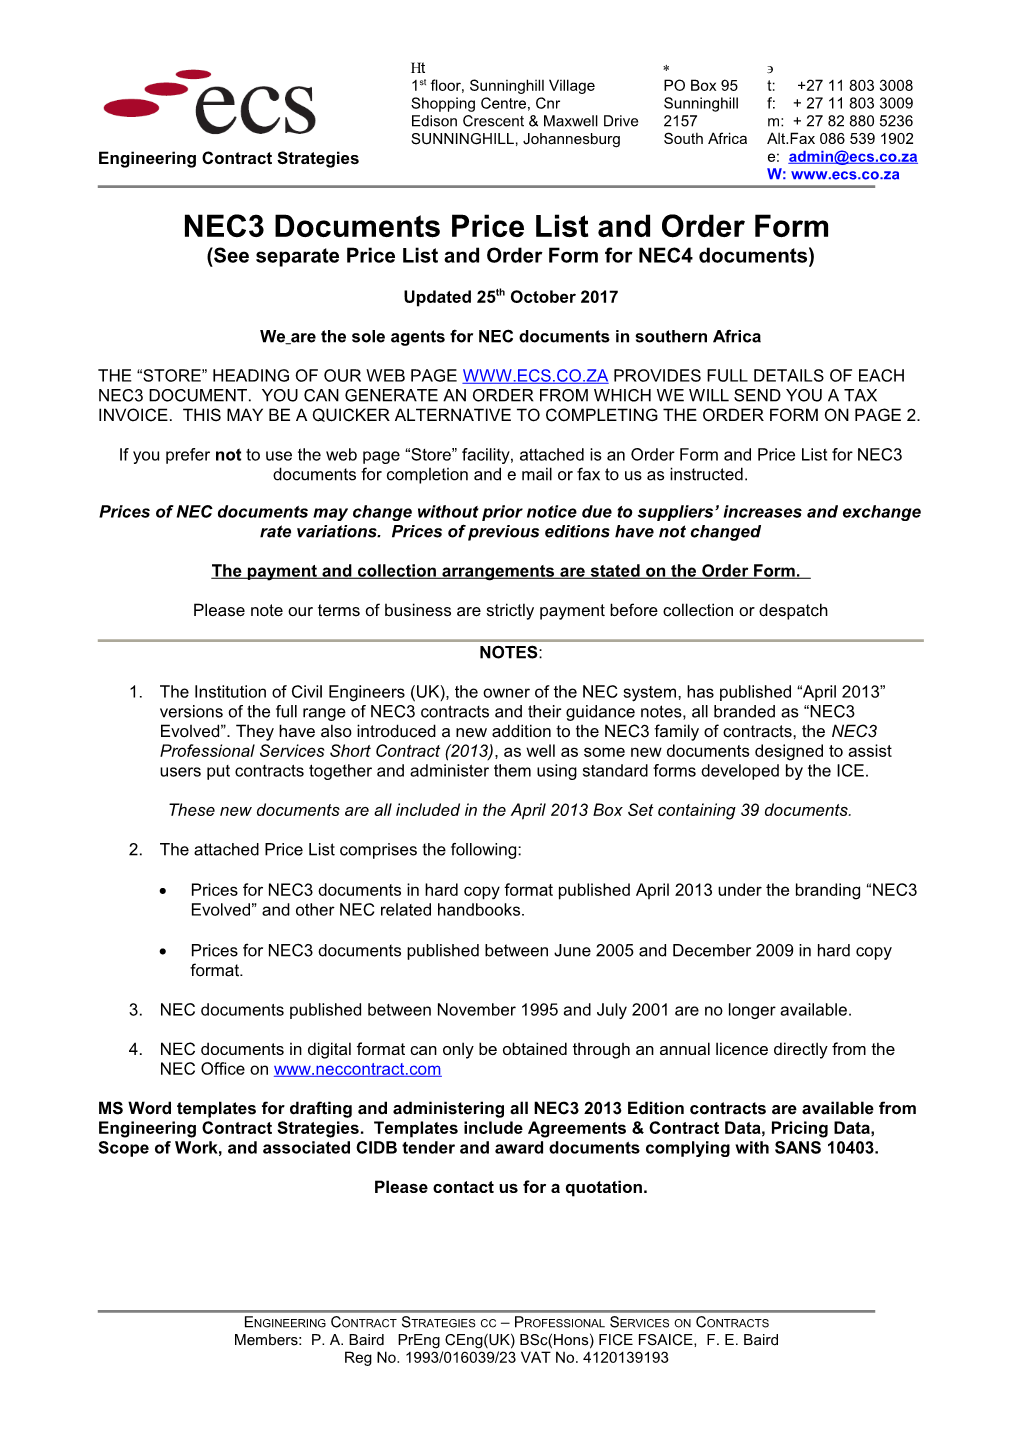 NEC3 Documents Price List and Order Form